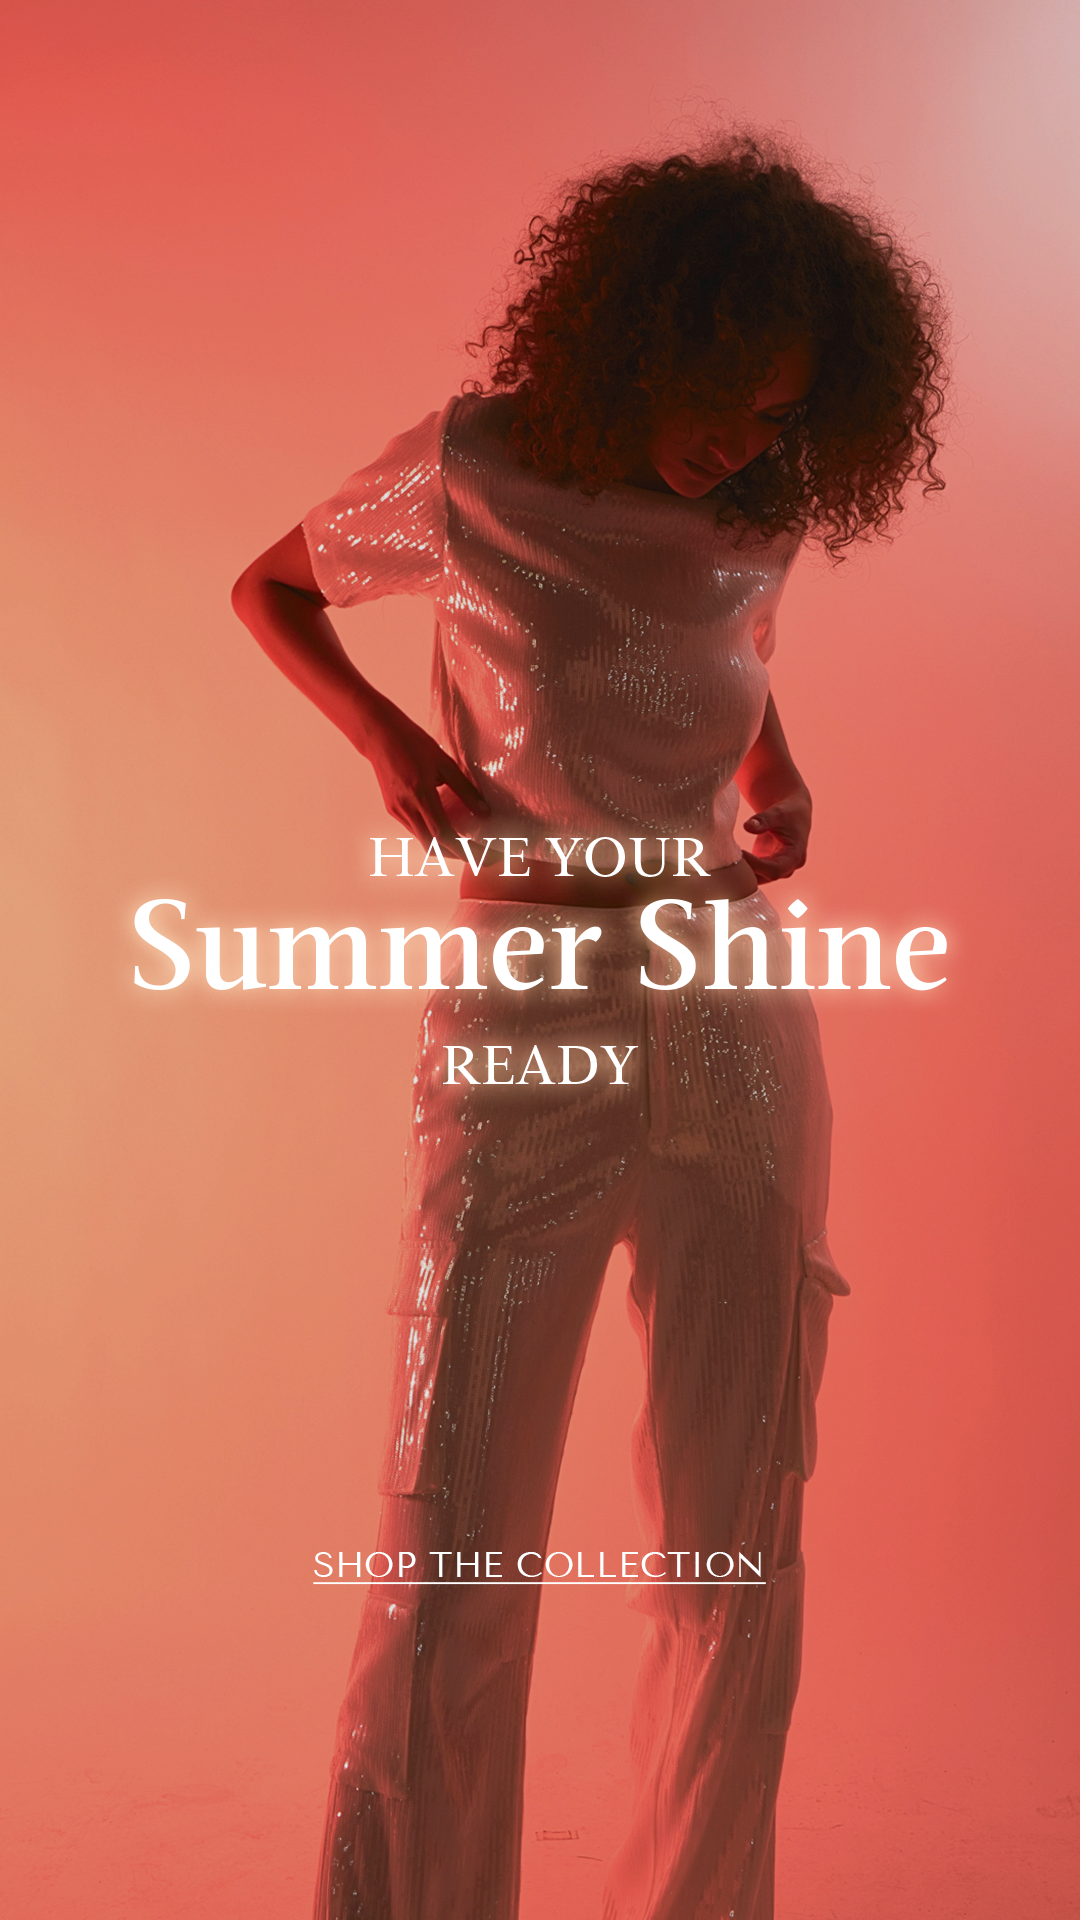 Have Your Summer Shine Ready And Shop The Collection Available from Endless Rose at endlessrose.com